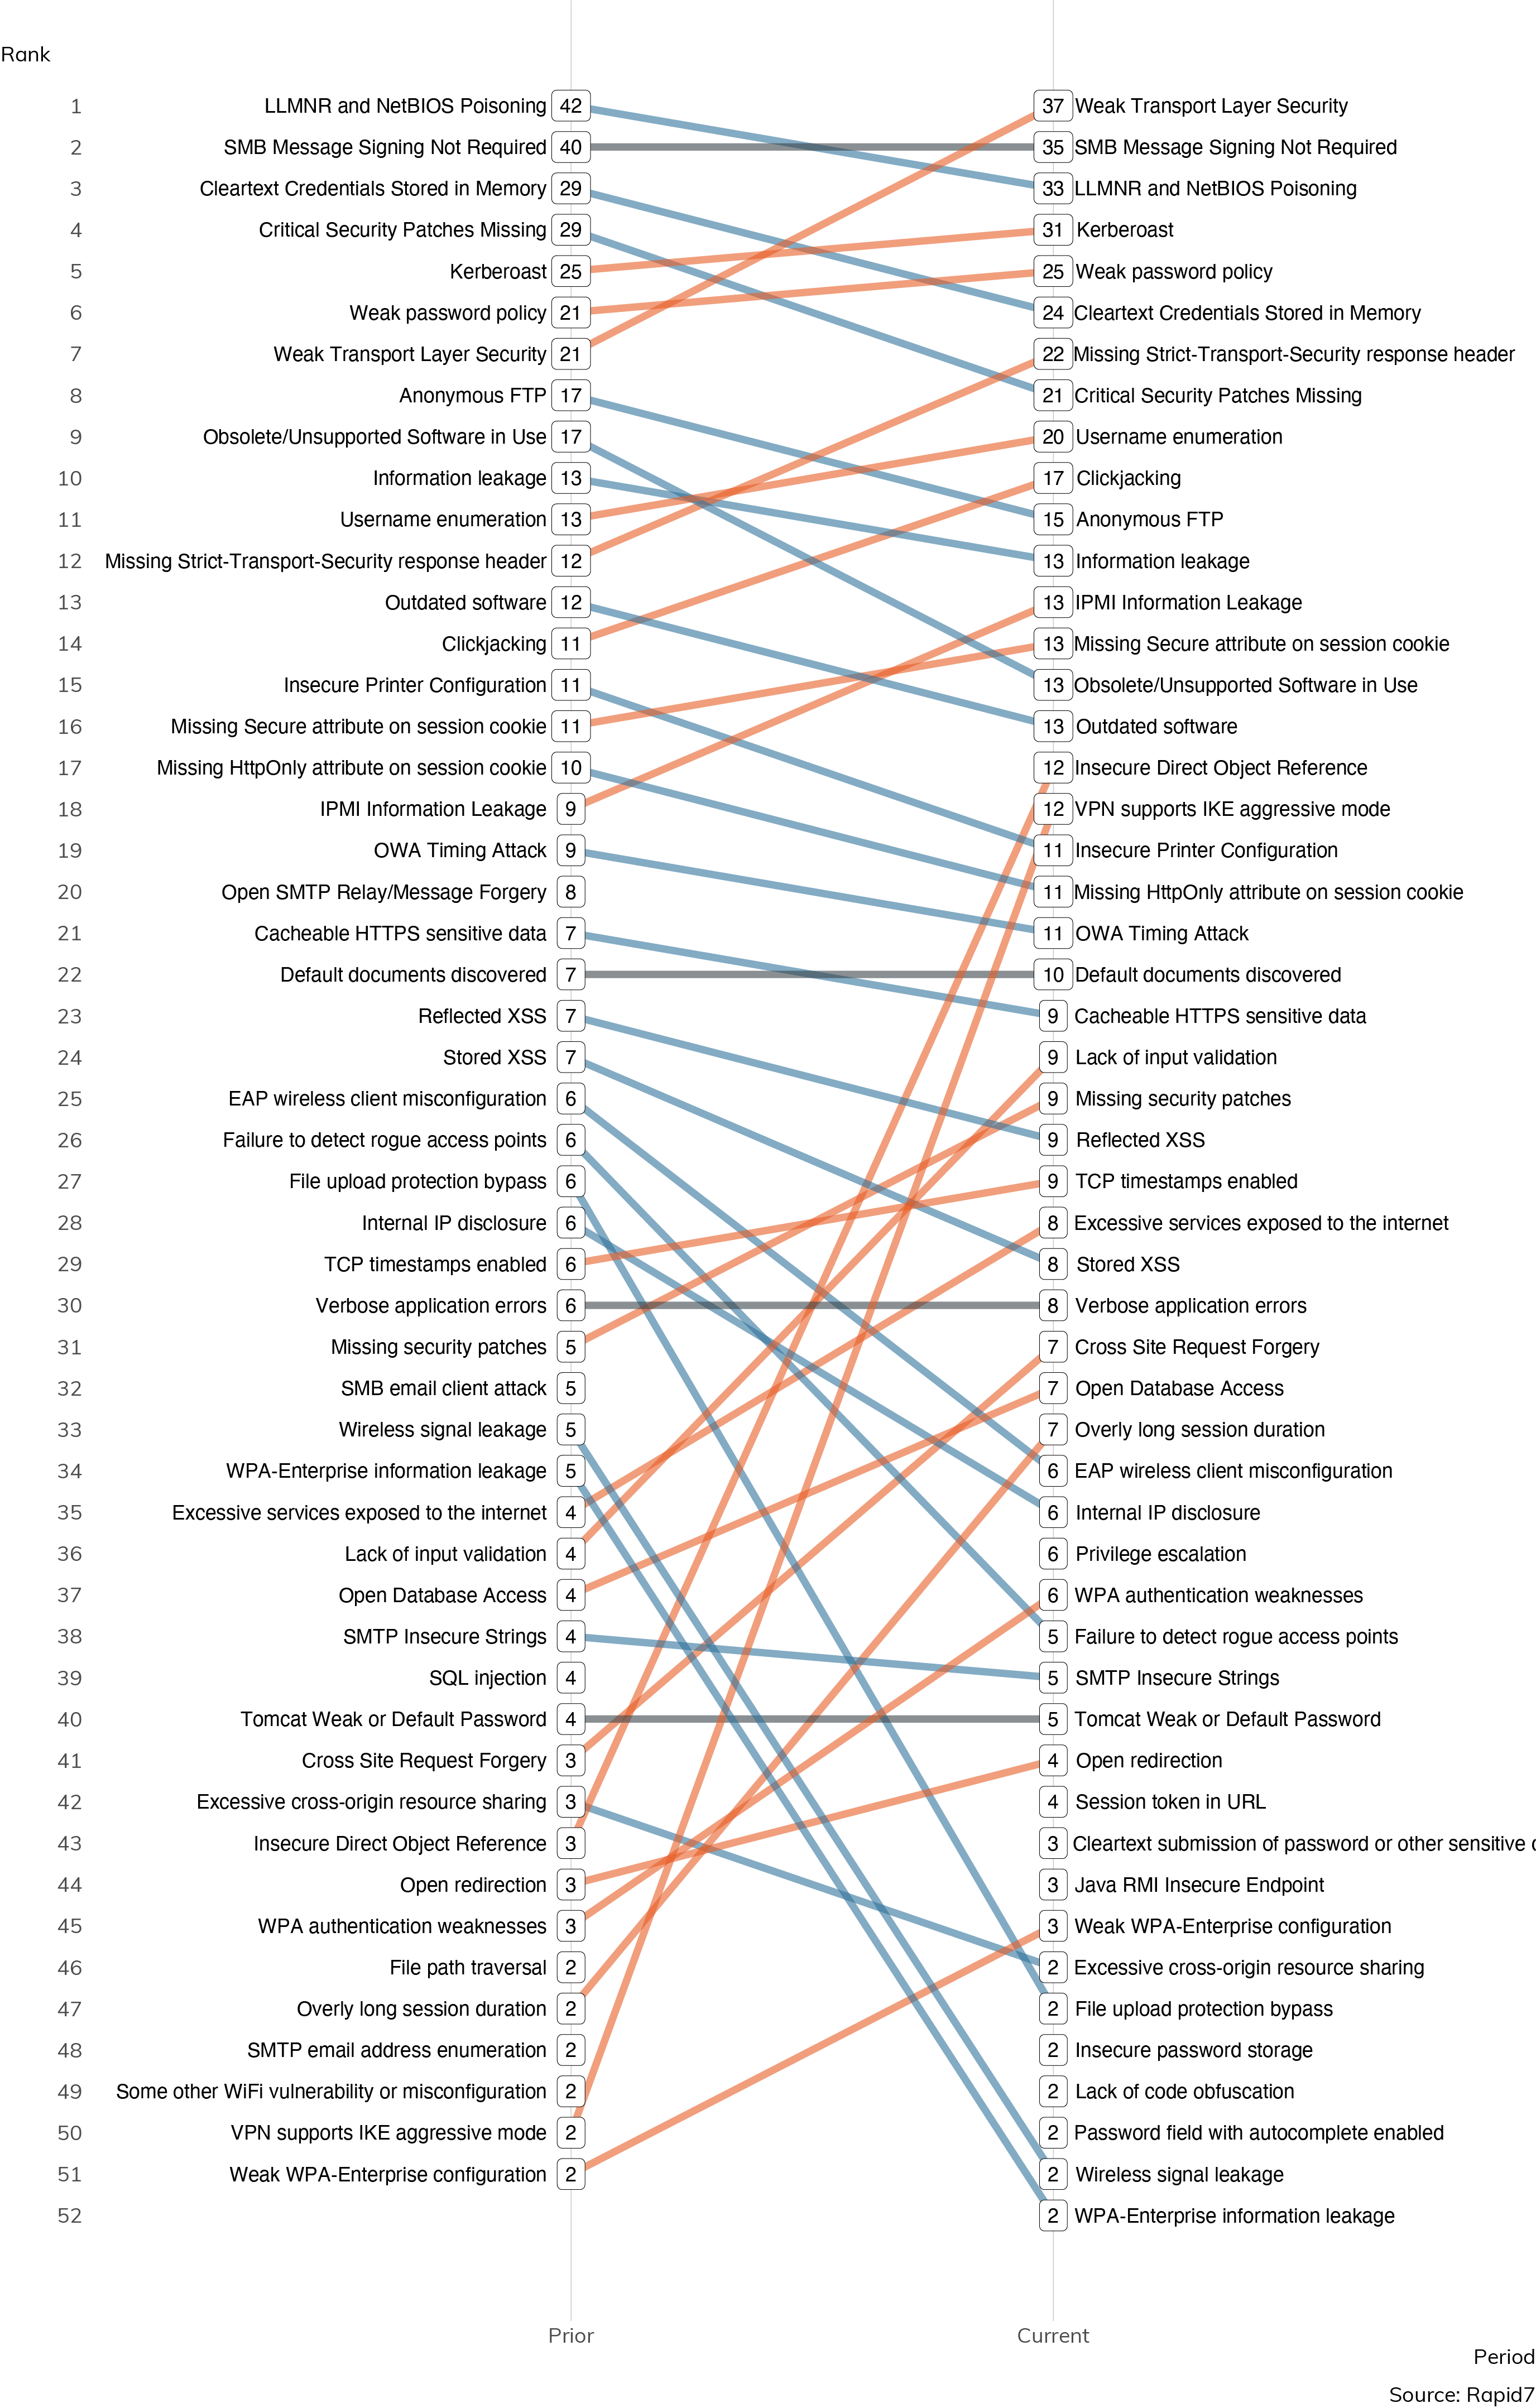 Figure 13: Prior vs. Current Vulnerabilities (Ordering based on in-period relative frequency. Numeric labels reflect count of vulnerability instances.) 